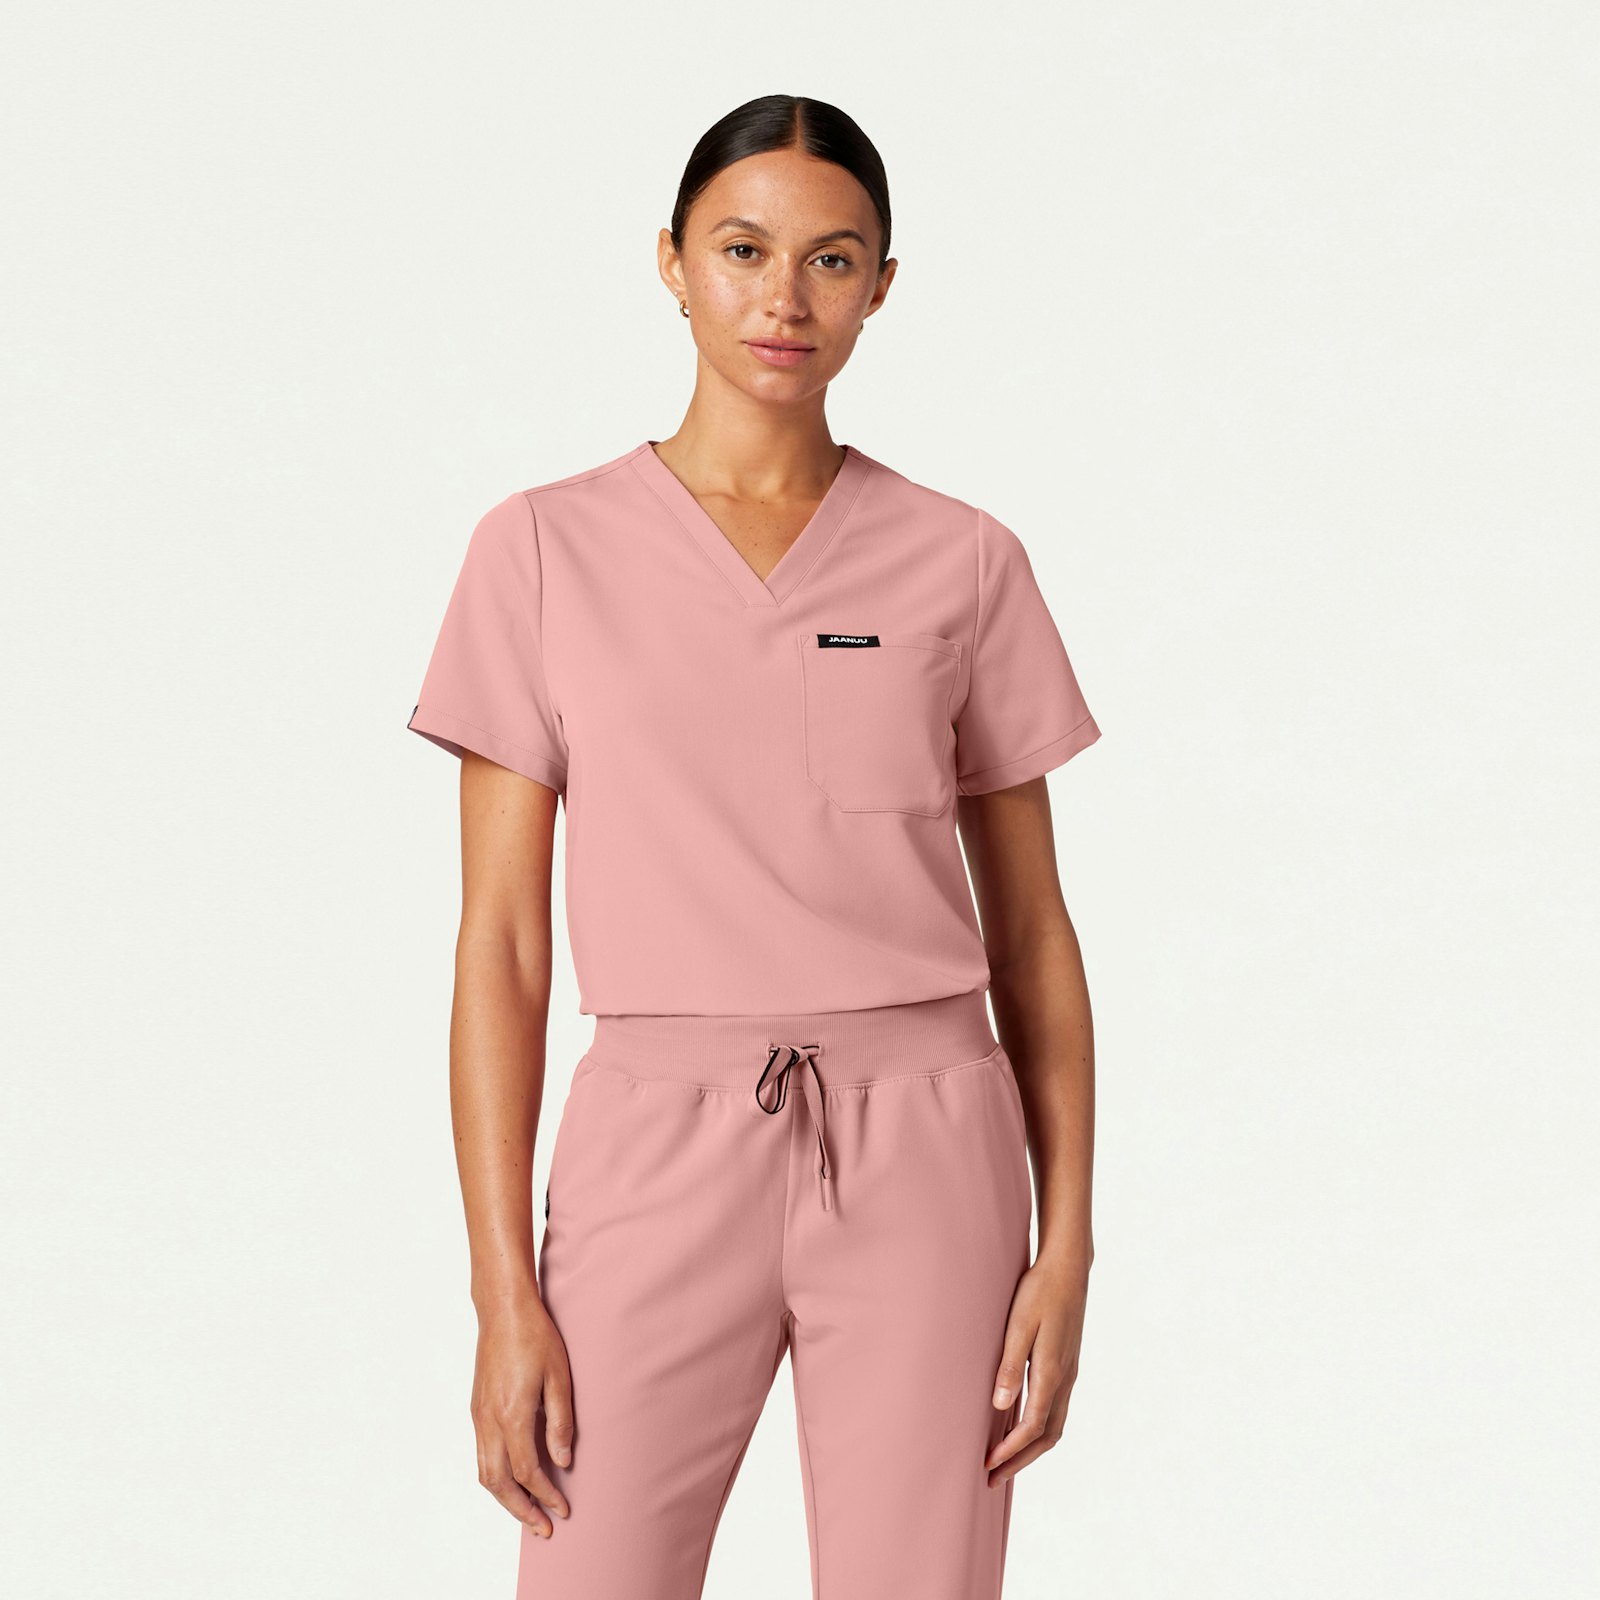 Emigrere fup Mathis Rhena Classic Scrub Top in Mauve - Women's Tops by Jaanuu